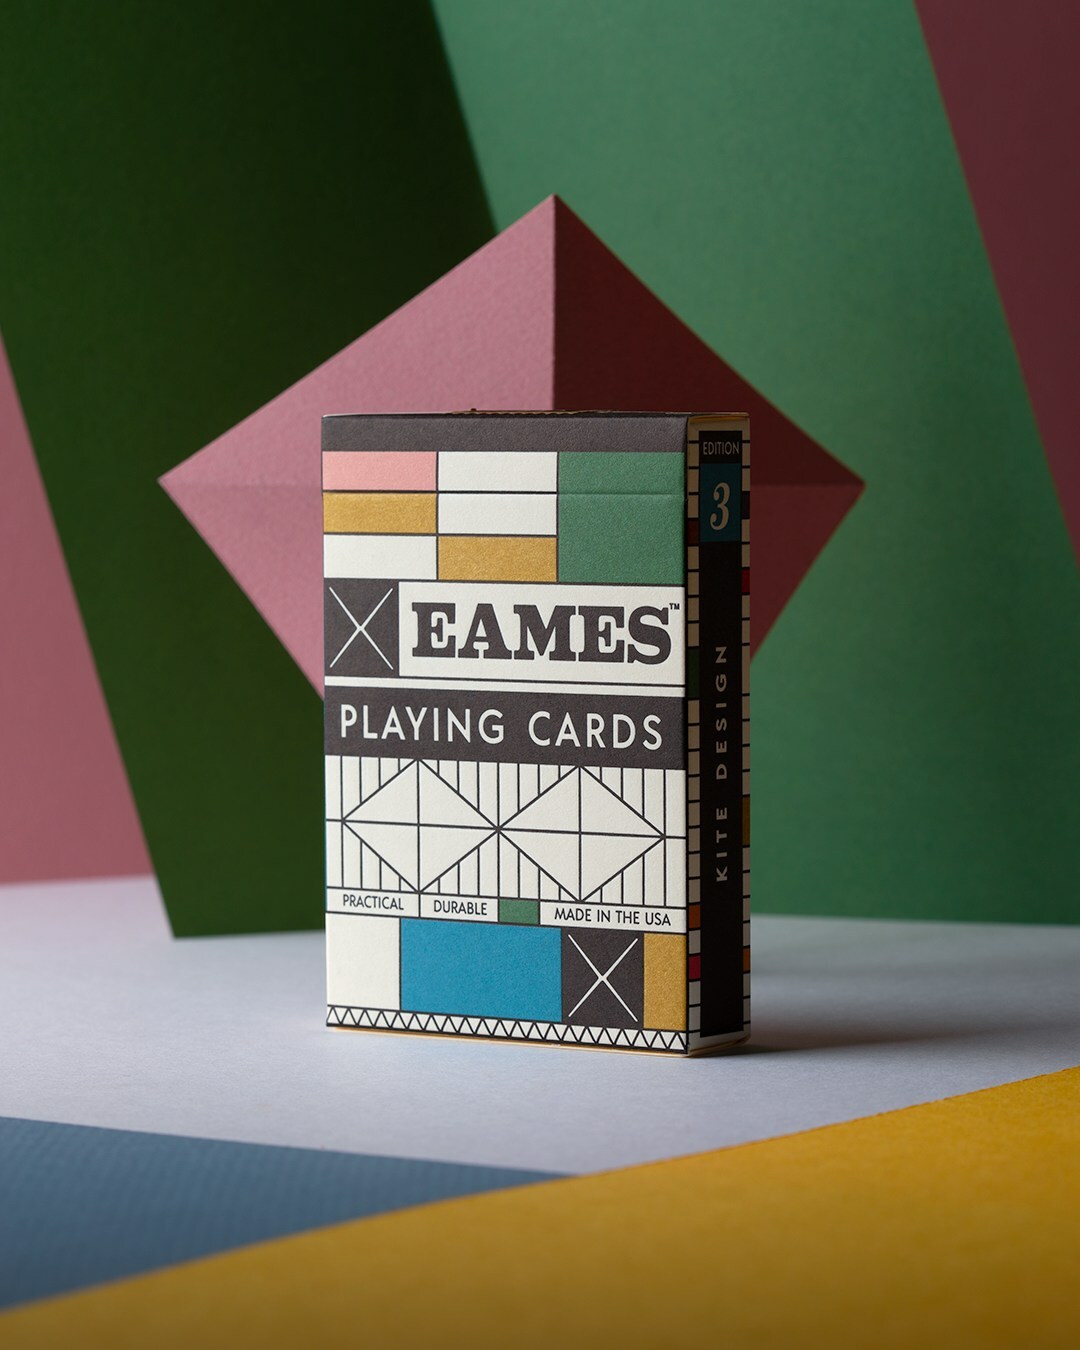 Art of Play Designs Exclusive Playing Cards With Eames Office For Pop-Up Exhibition At MoMA Design Store